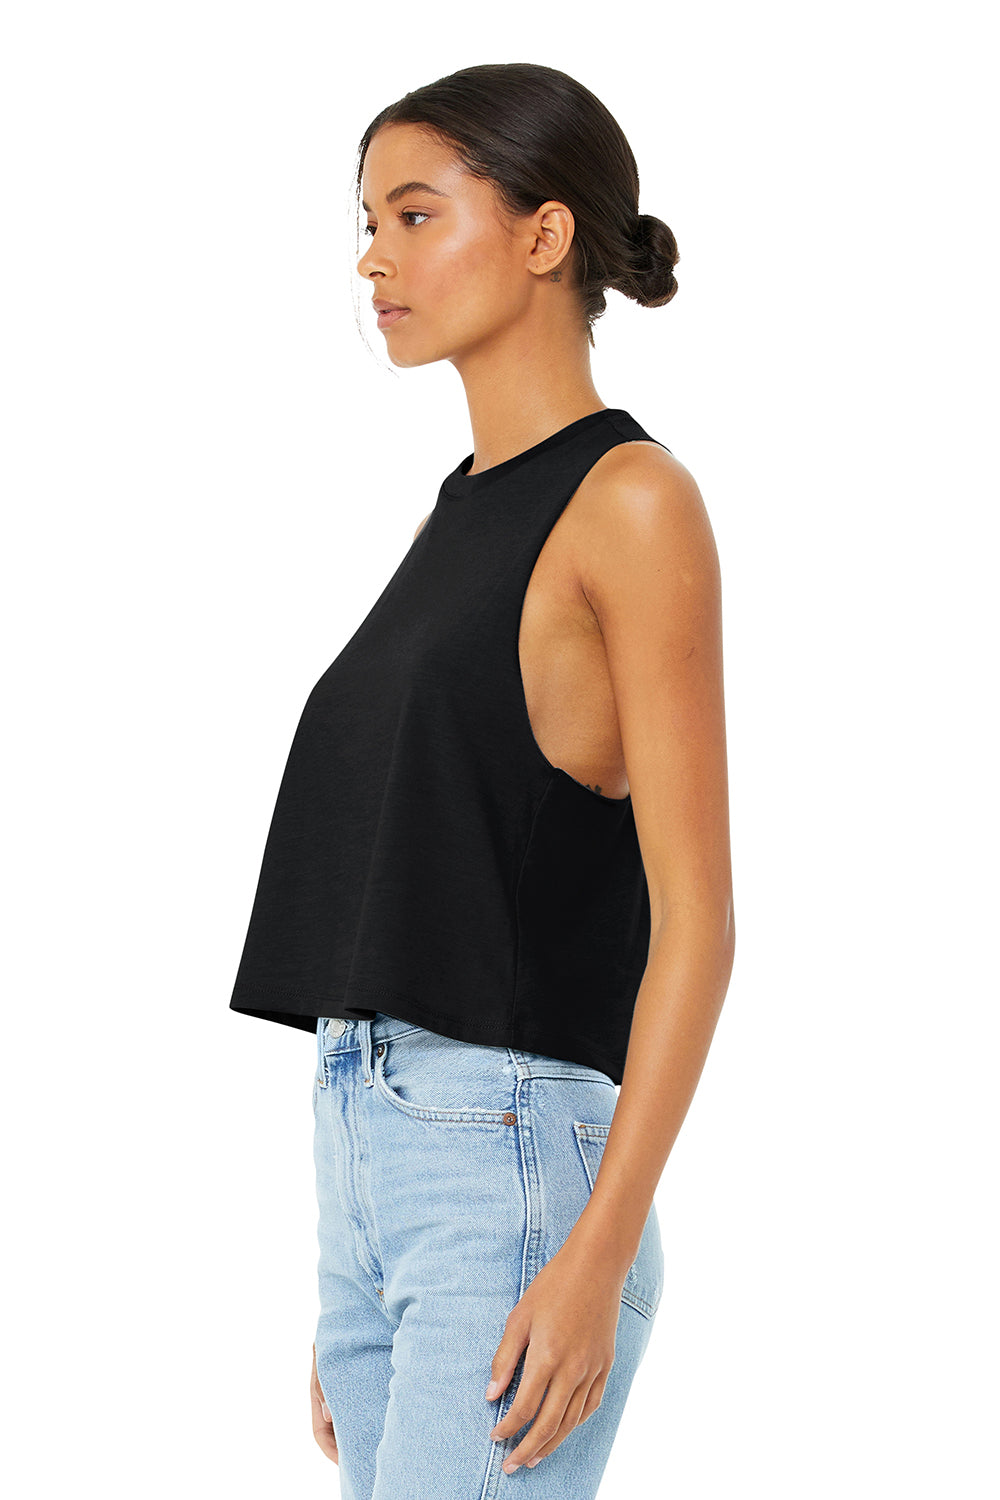 Bella + Canvas BC6682/6682 Womens Cropped Tank Top Solid Black Model 3Q